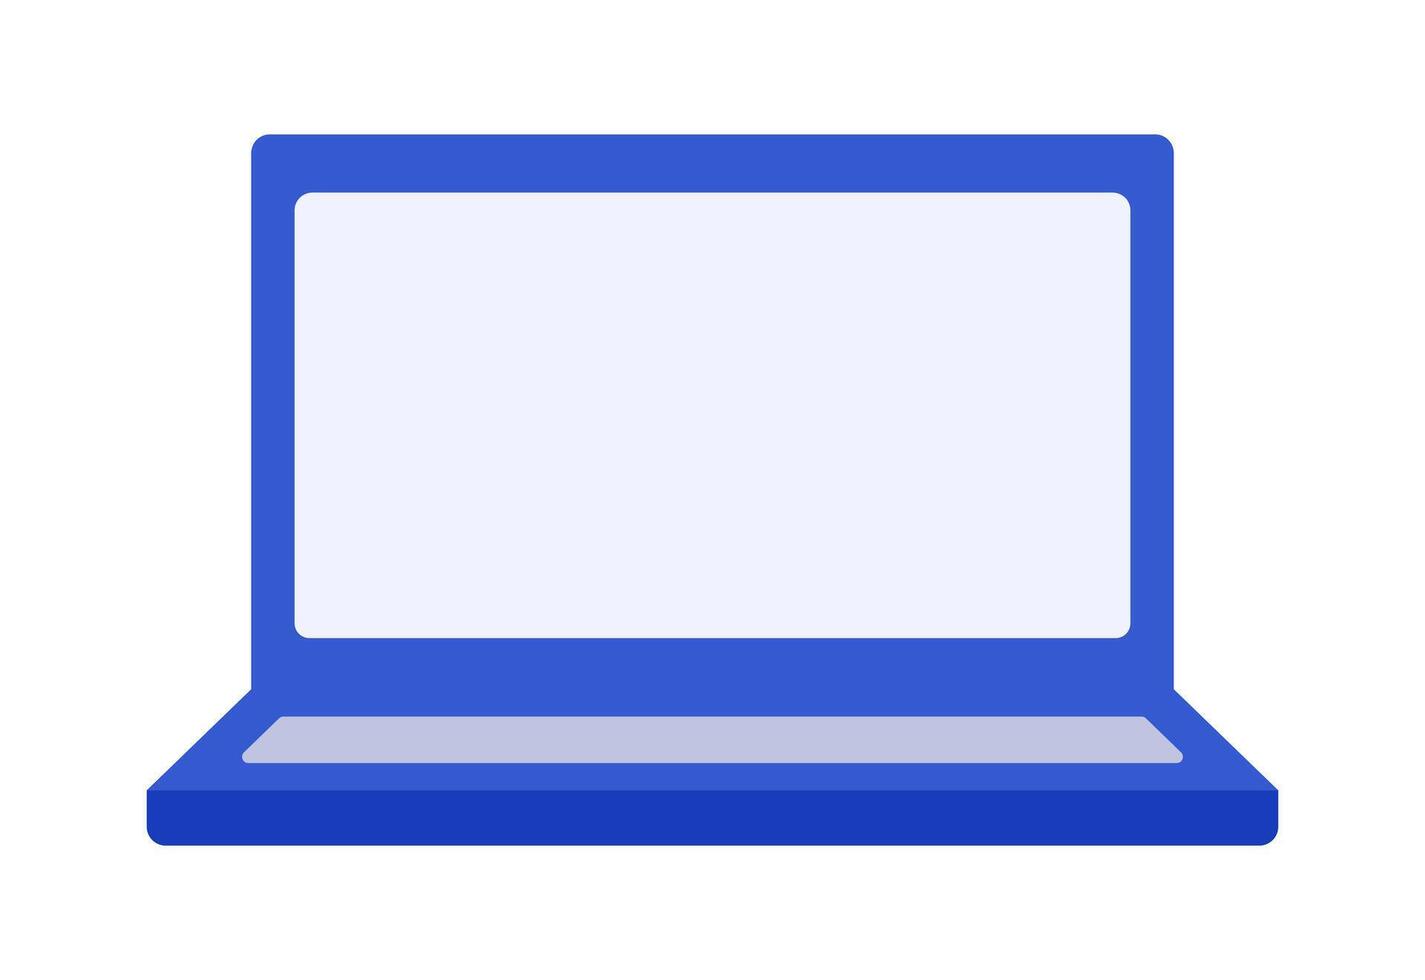 Blue Isometric Laptop with blank screen for inserting text. Portable computer. Office equipment. Front view. IT technology. PC with display, keyboard. Color image. Isolated object. illustration vector